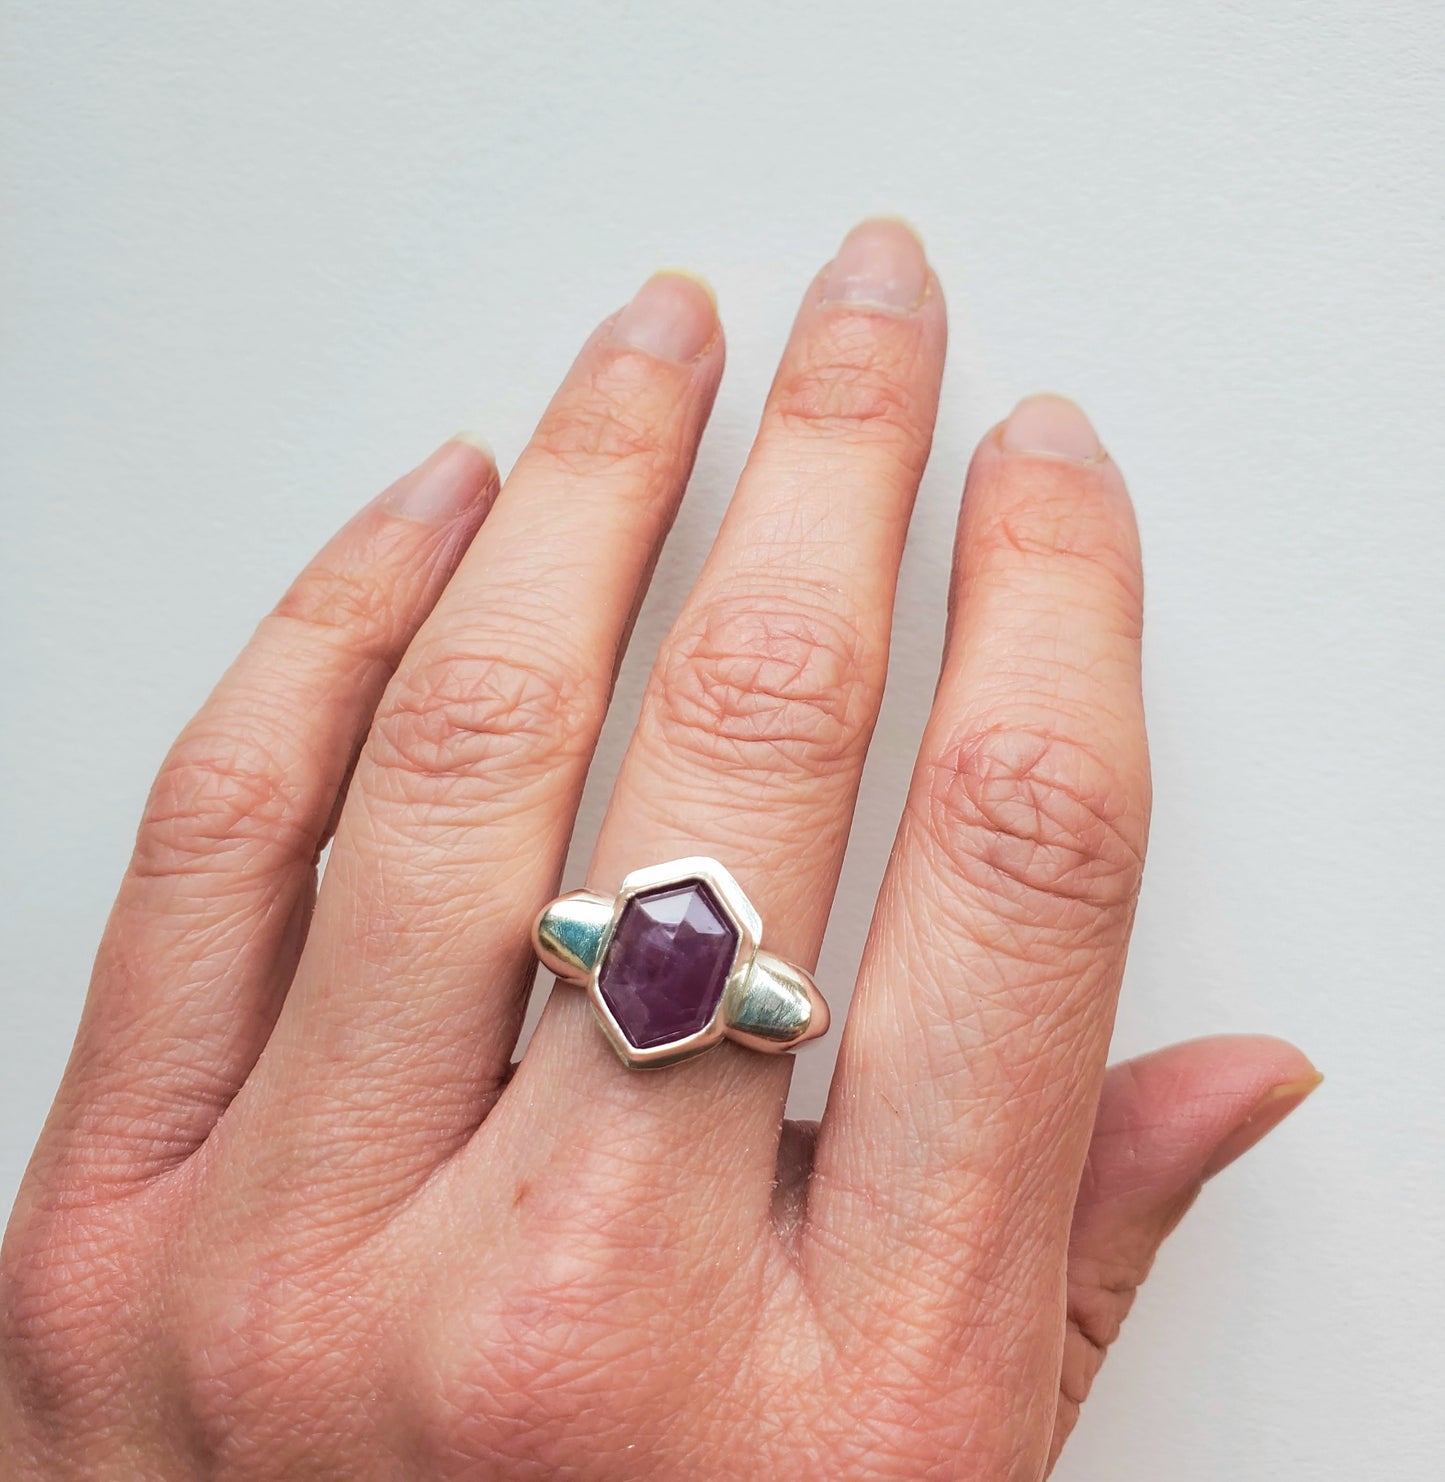 Square Ring- Star Sapphire - Size 8.5